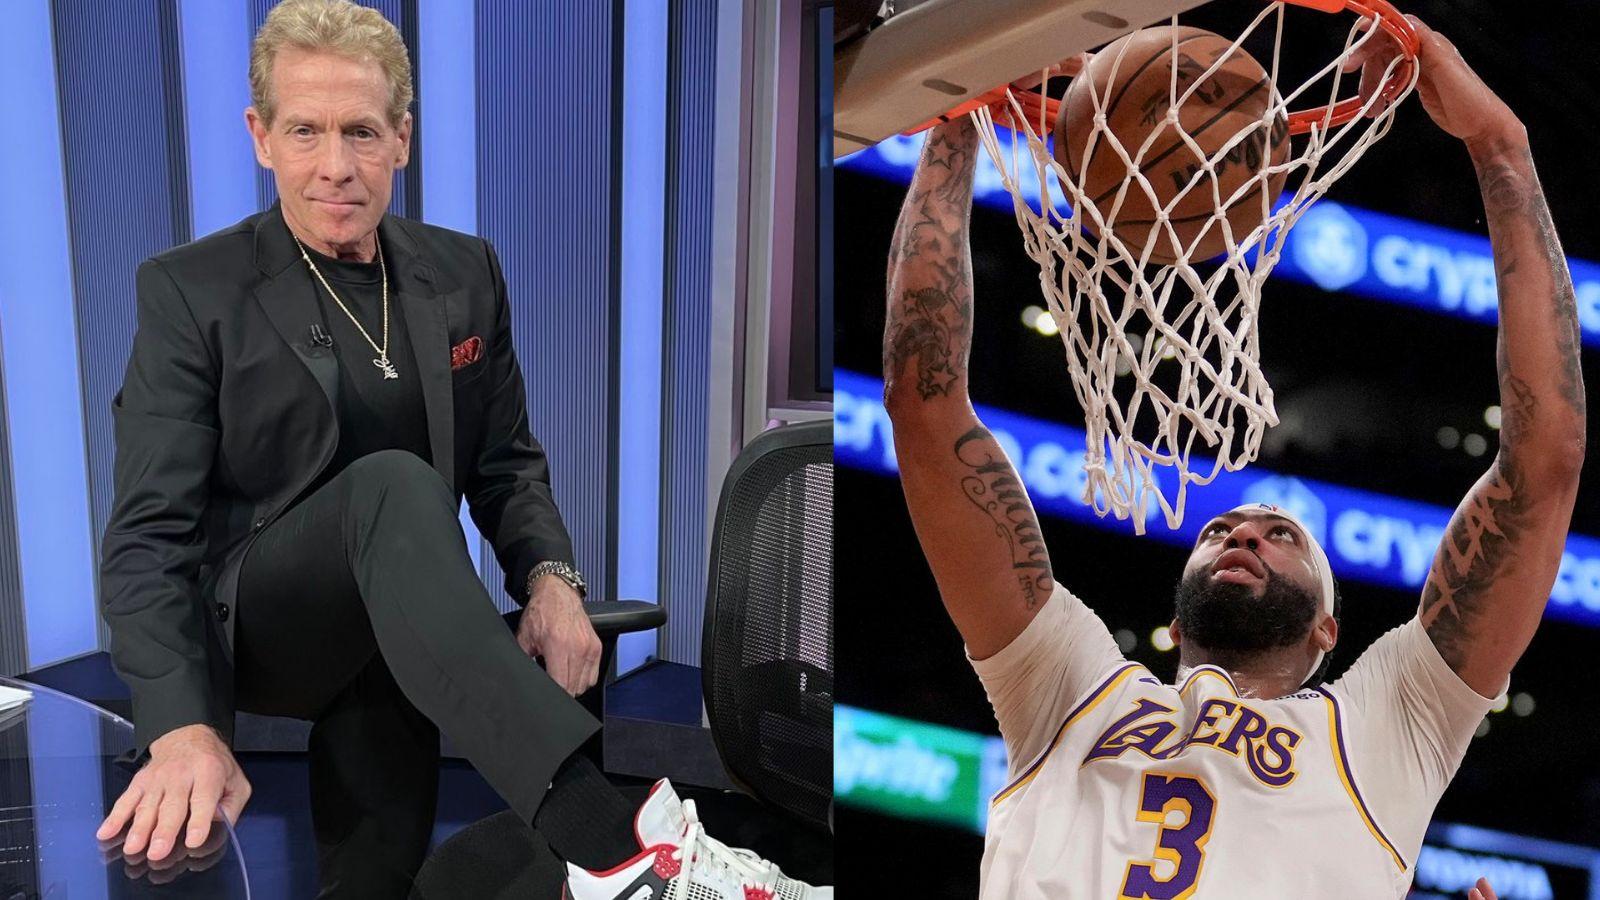 Skip Bayless on the set of FS1's "Undisputed," (left) and Anthony Davis dunking in a game for the Los Angeles Lakers.